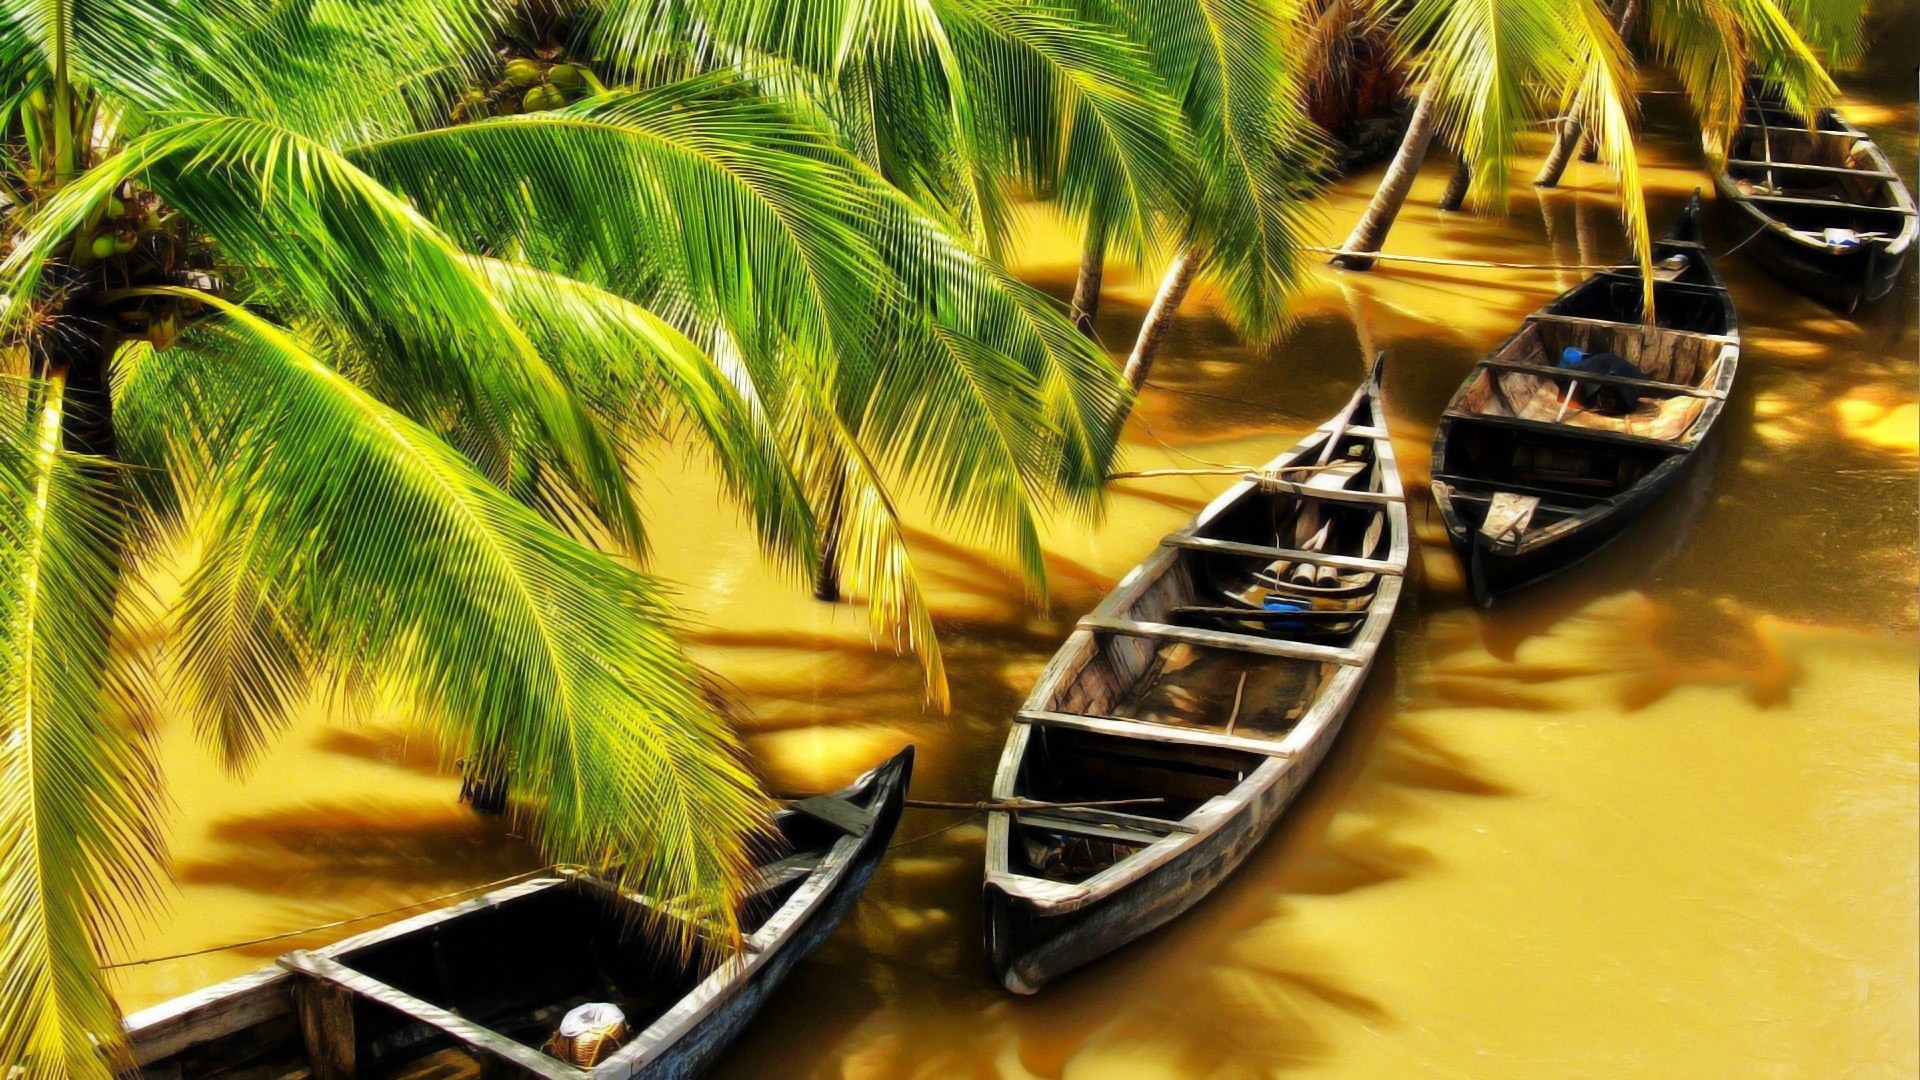 Nature Water Boat River Palm Trees India Flood Sunlight Shadow Wood Yellow 1920x1080